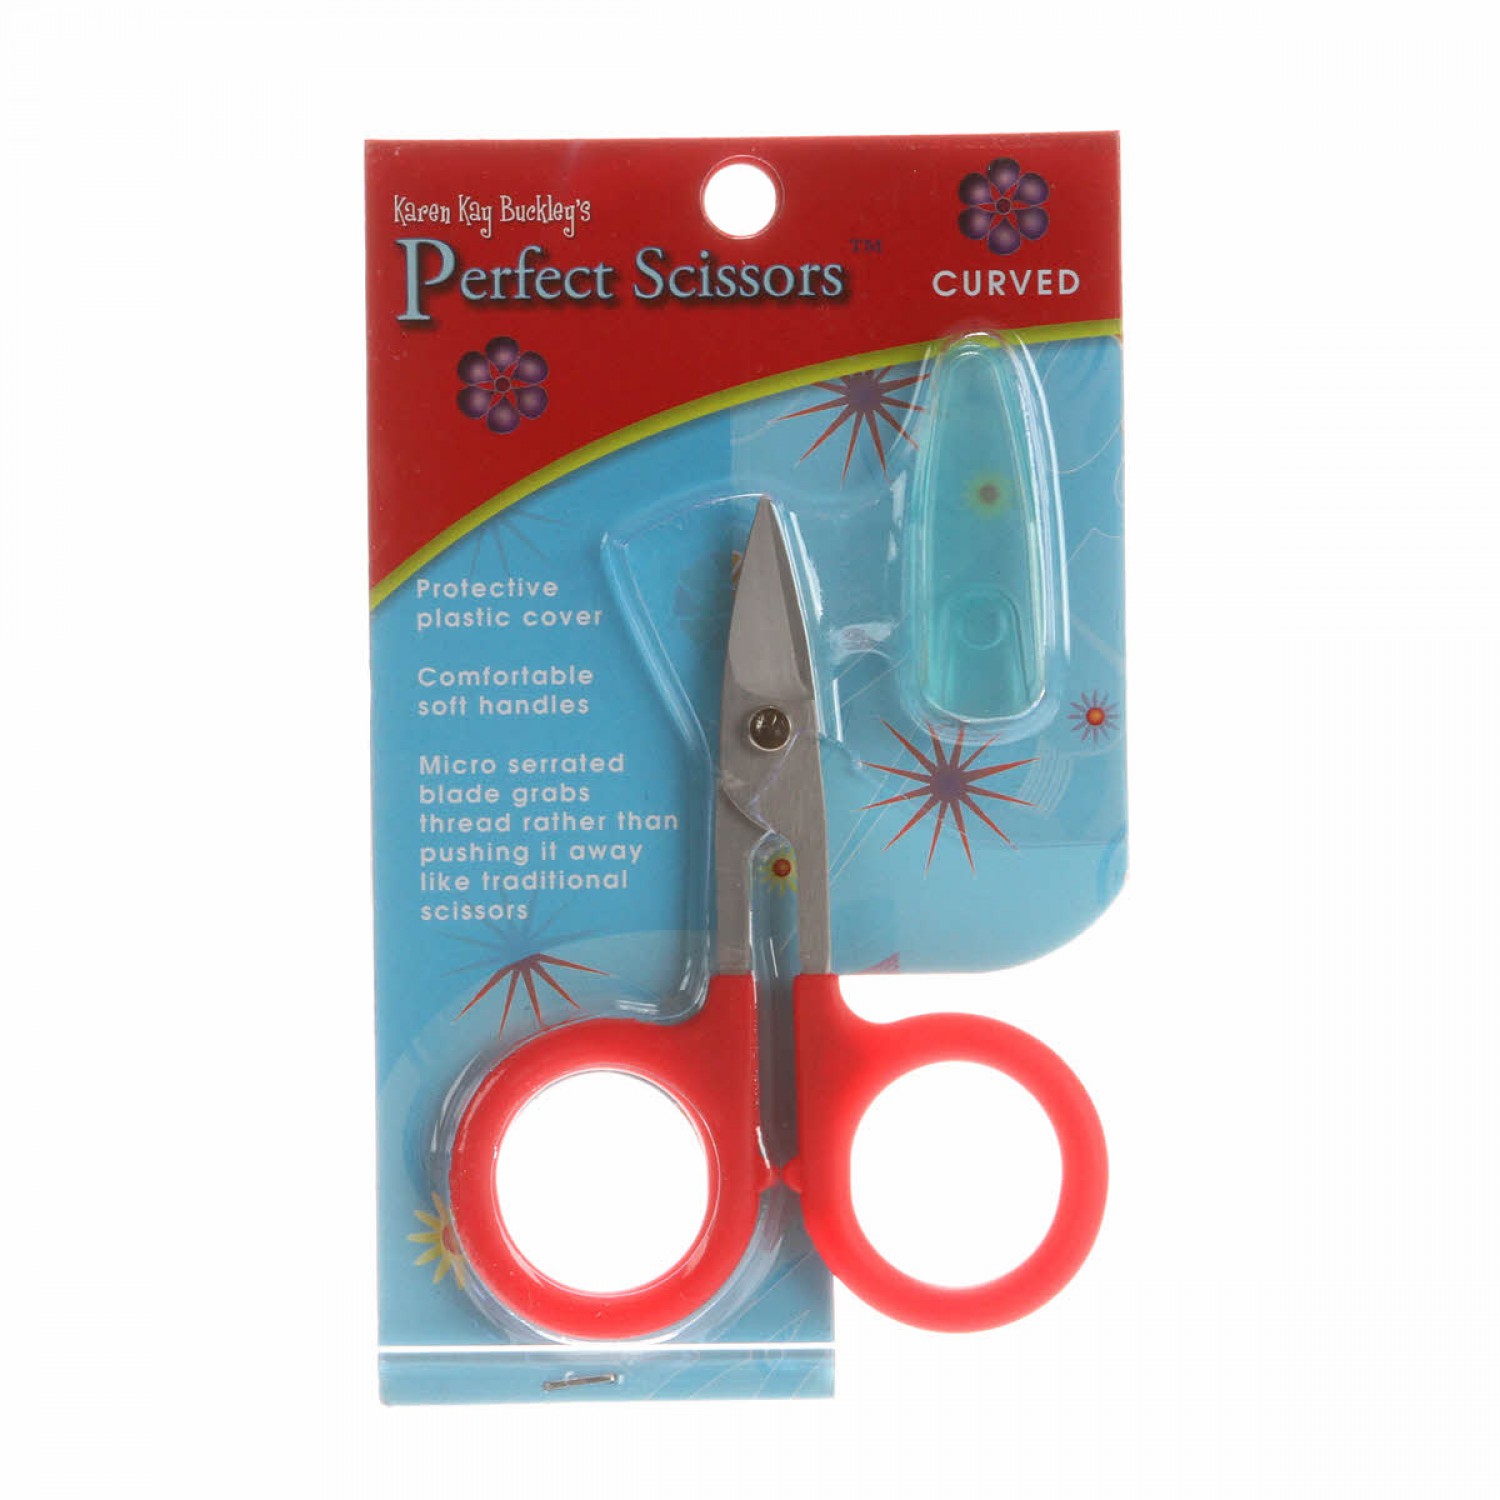 How to make a protective cover for sharp scissors